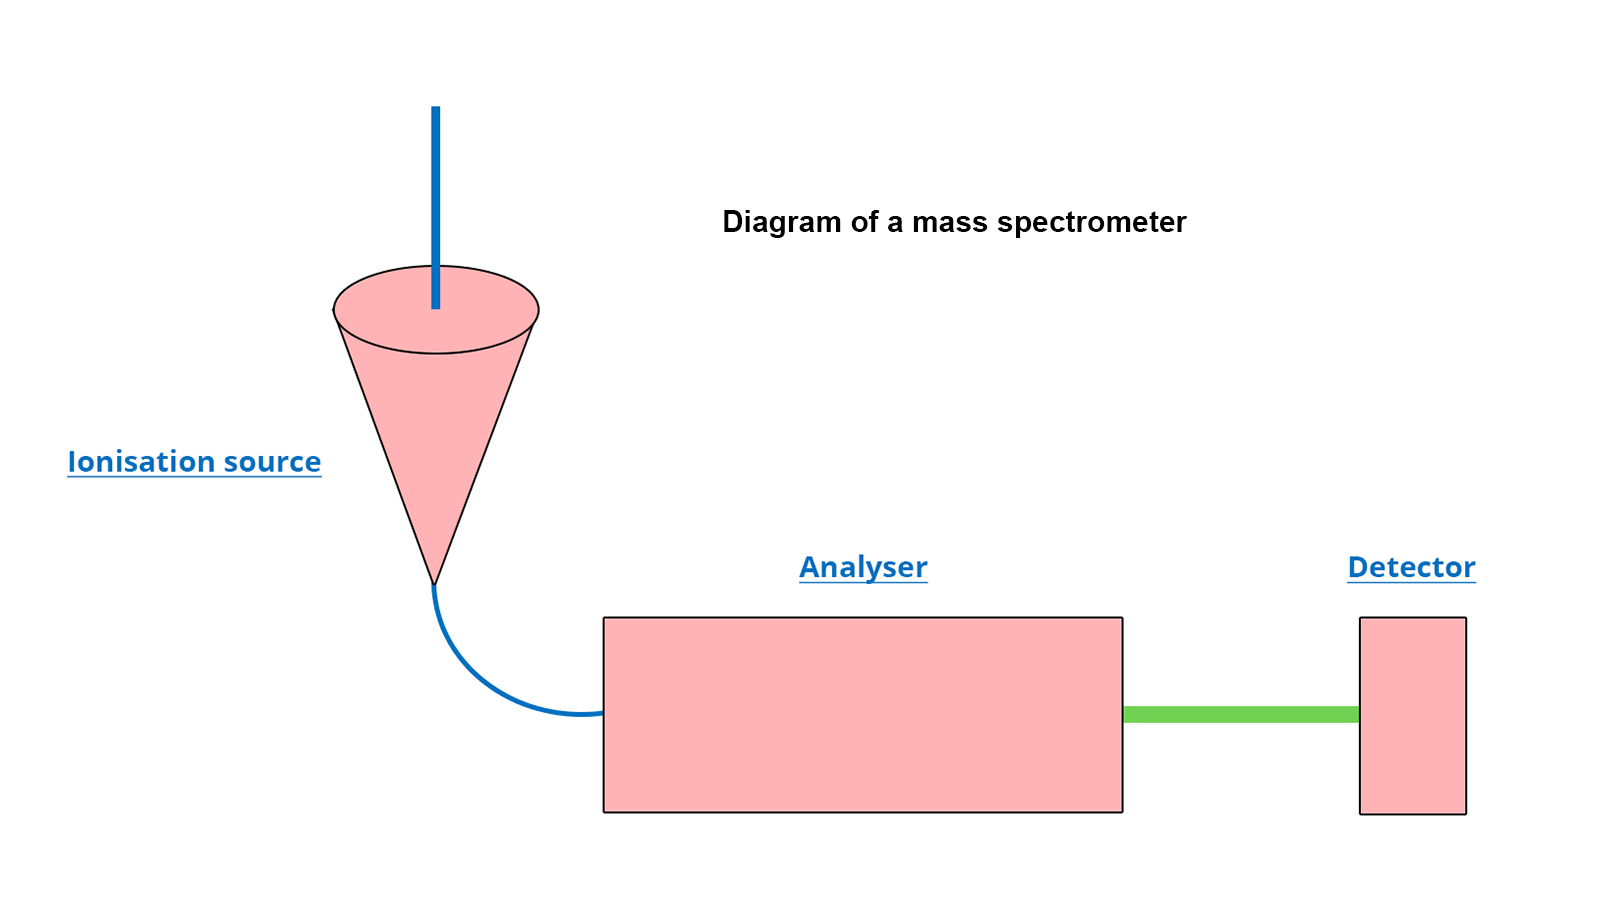 General diagram of a mass spectrometer. On the left a cone representing the ionization source. At the tip of the cone is a blue line going to a rectangle representing the analyzer. Finally, to the right of the analyzer is a green line connecting it to another rectangle, the detector.